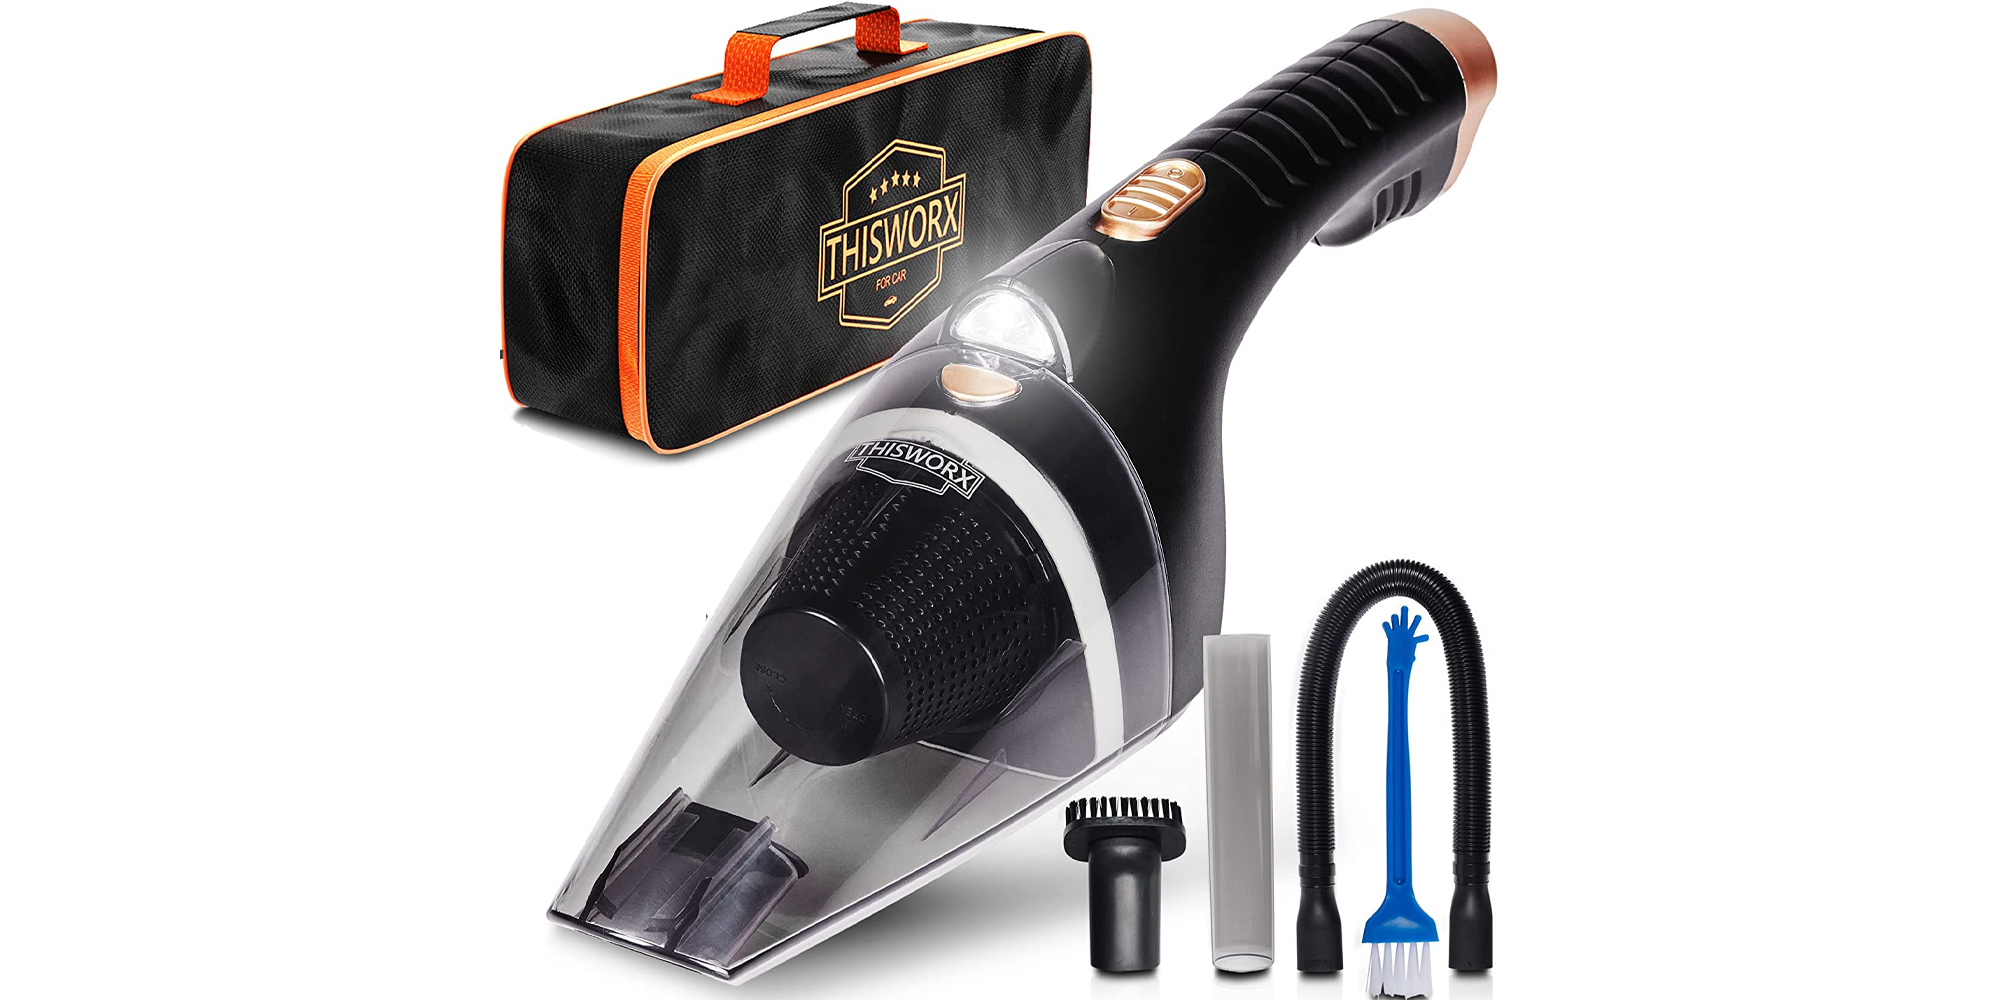 Prepare for spring cleaning with the ThisWorx Car Vacuum for $22